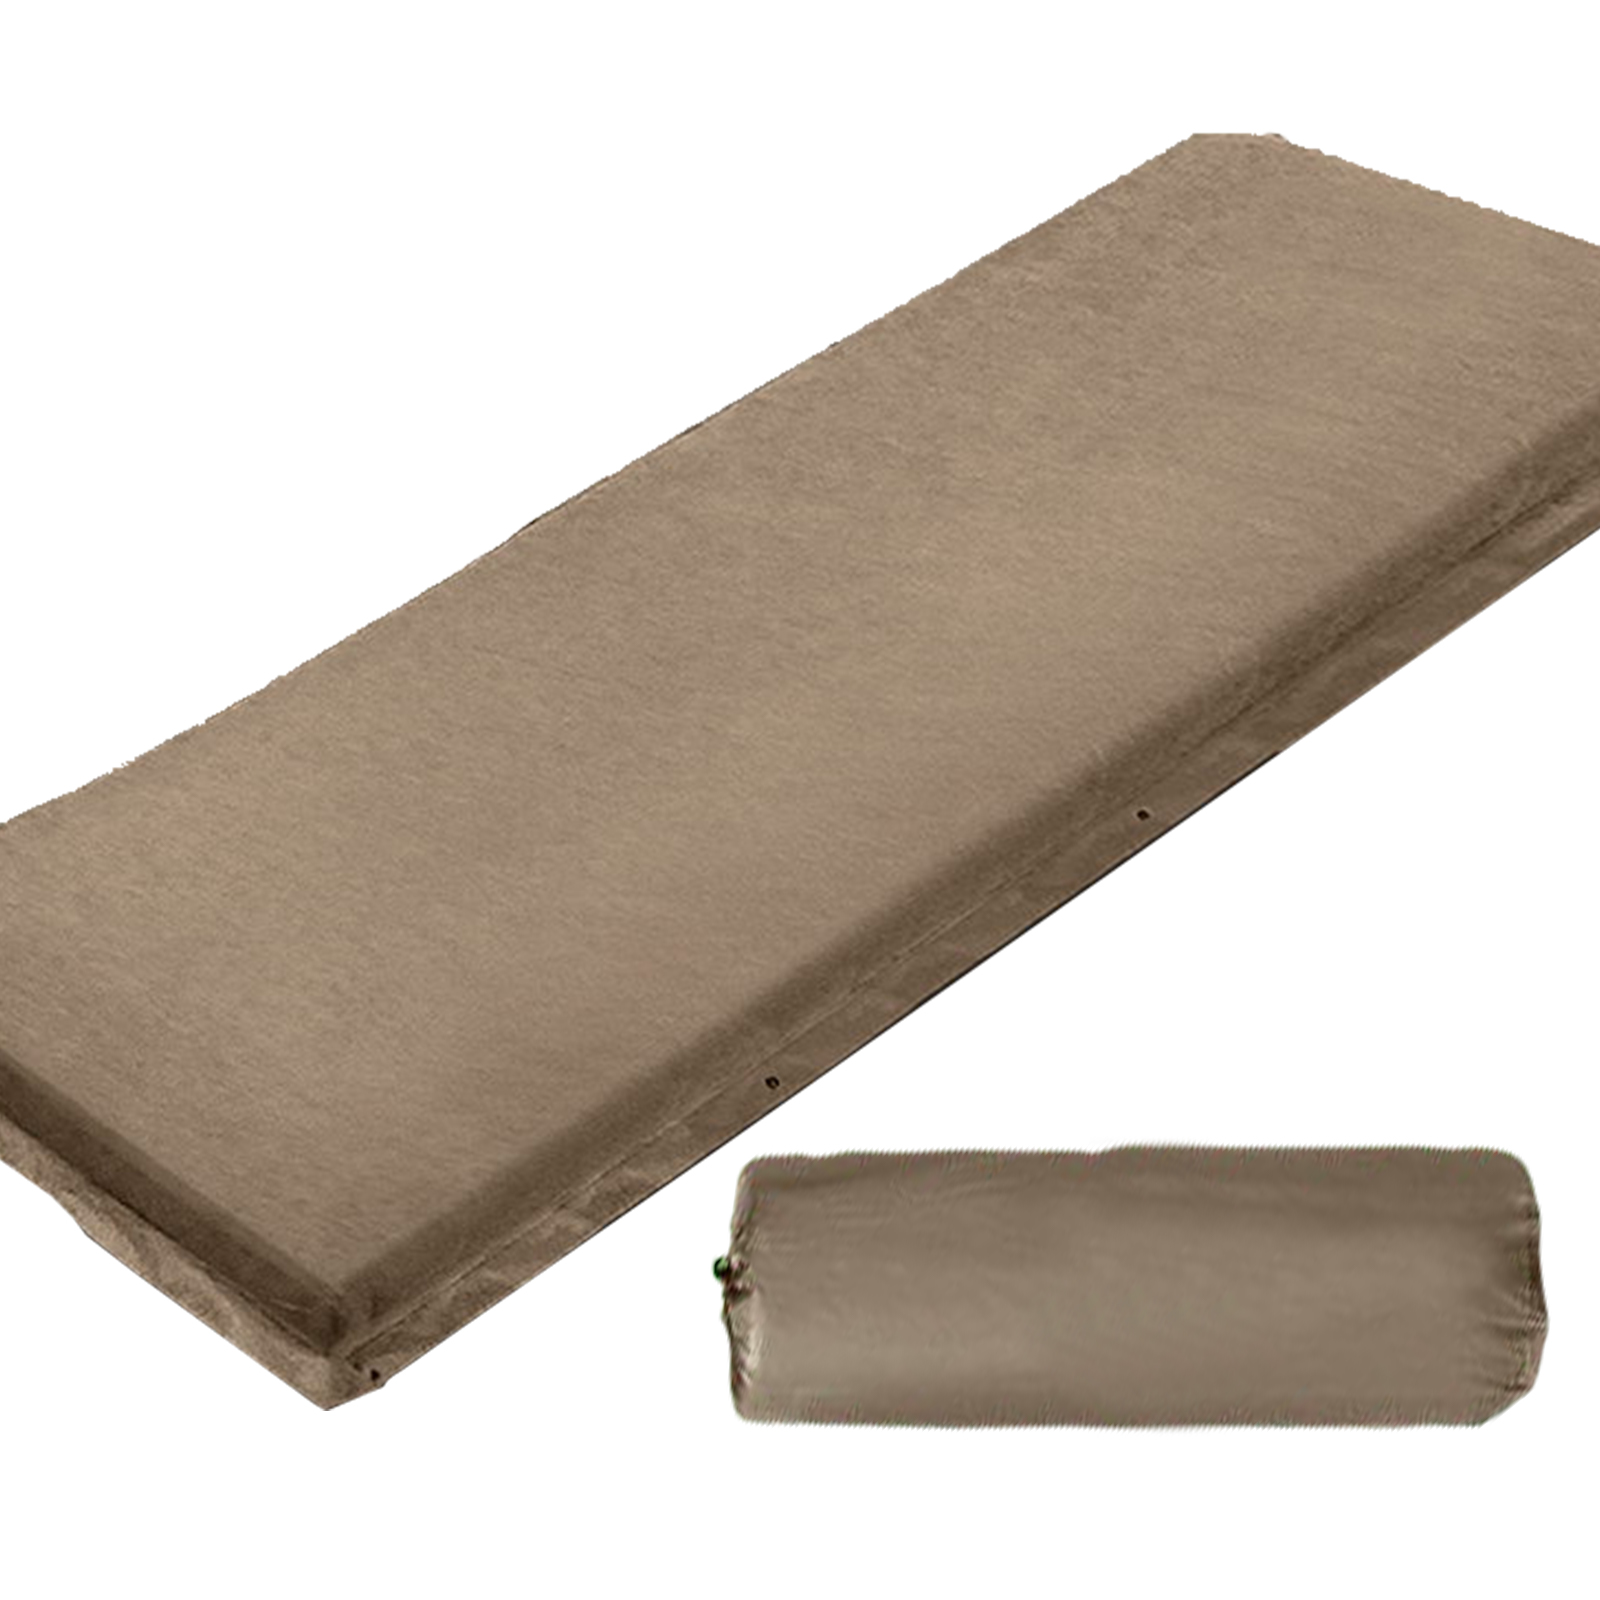 Single Size Self Inflating Matress Bed Mat Joinable 10CM Thick Coffee